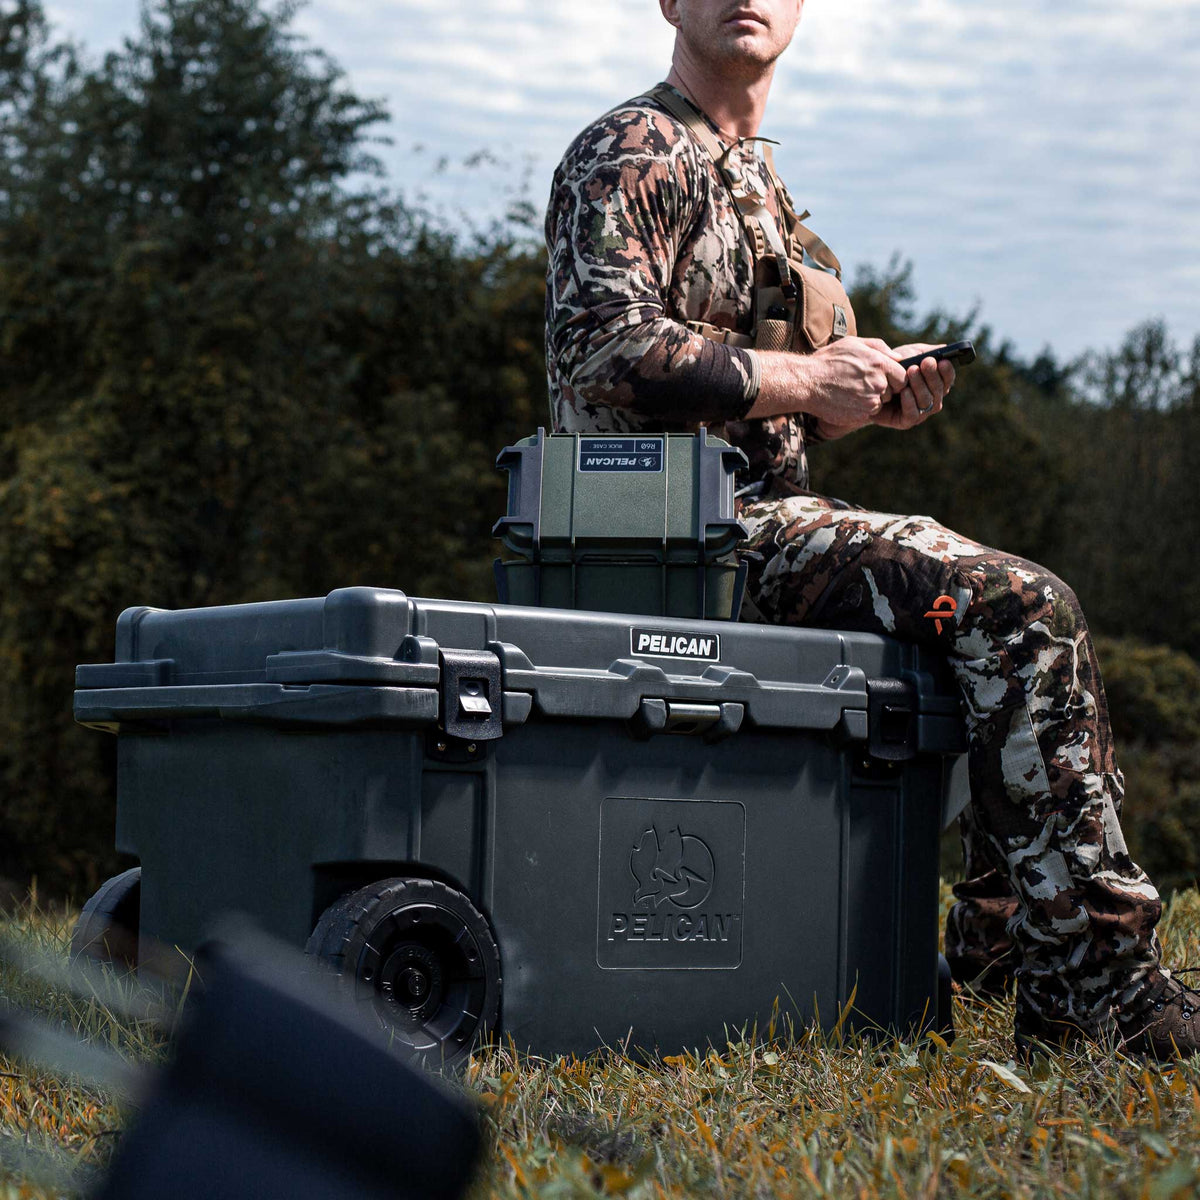 80QW-6-DKGRY Pelican 80QT Elite Wheeled Cooler in charcoal being used as a seat outside during a hunt